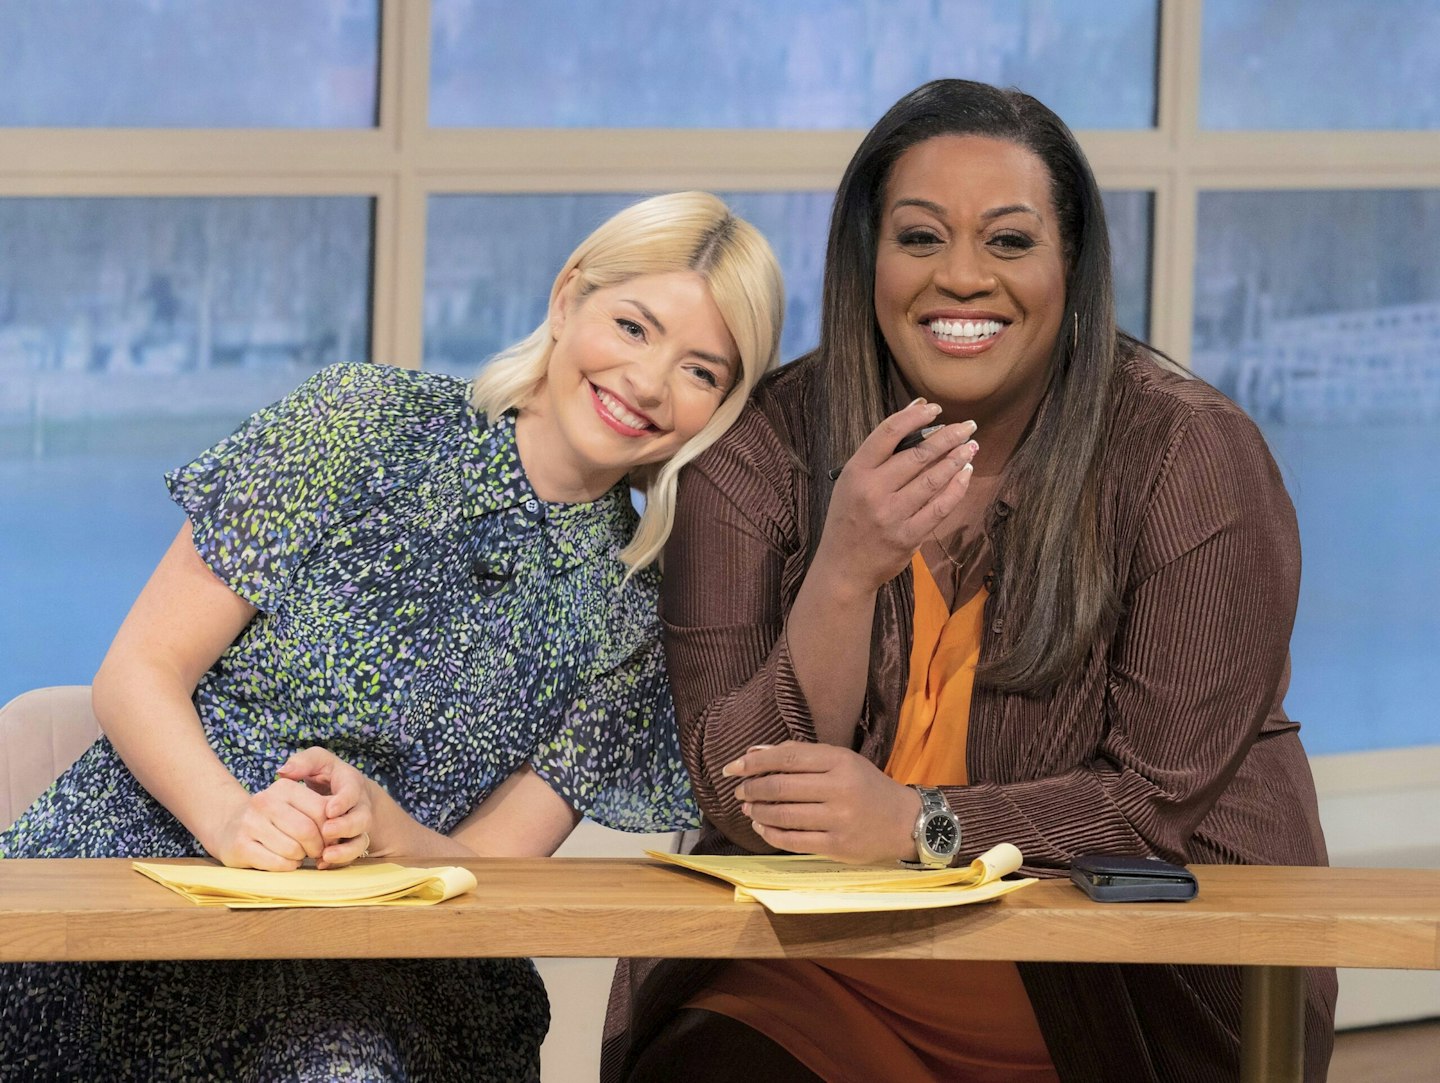 Holly Willoughby and Alison Hammond on This Morning